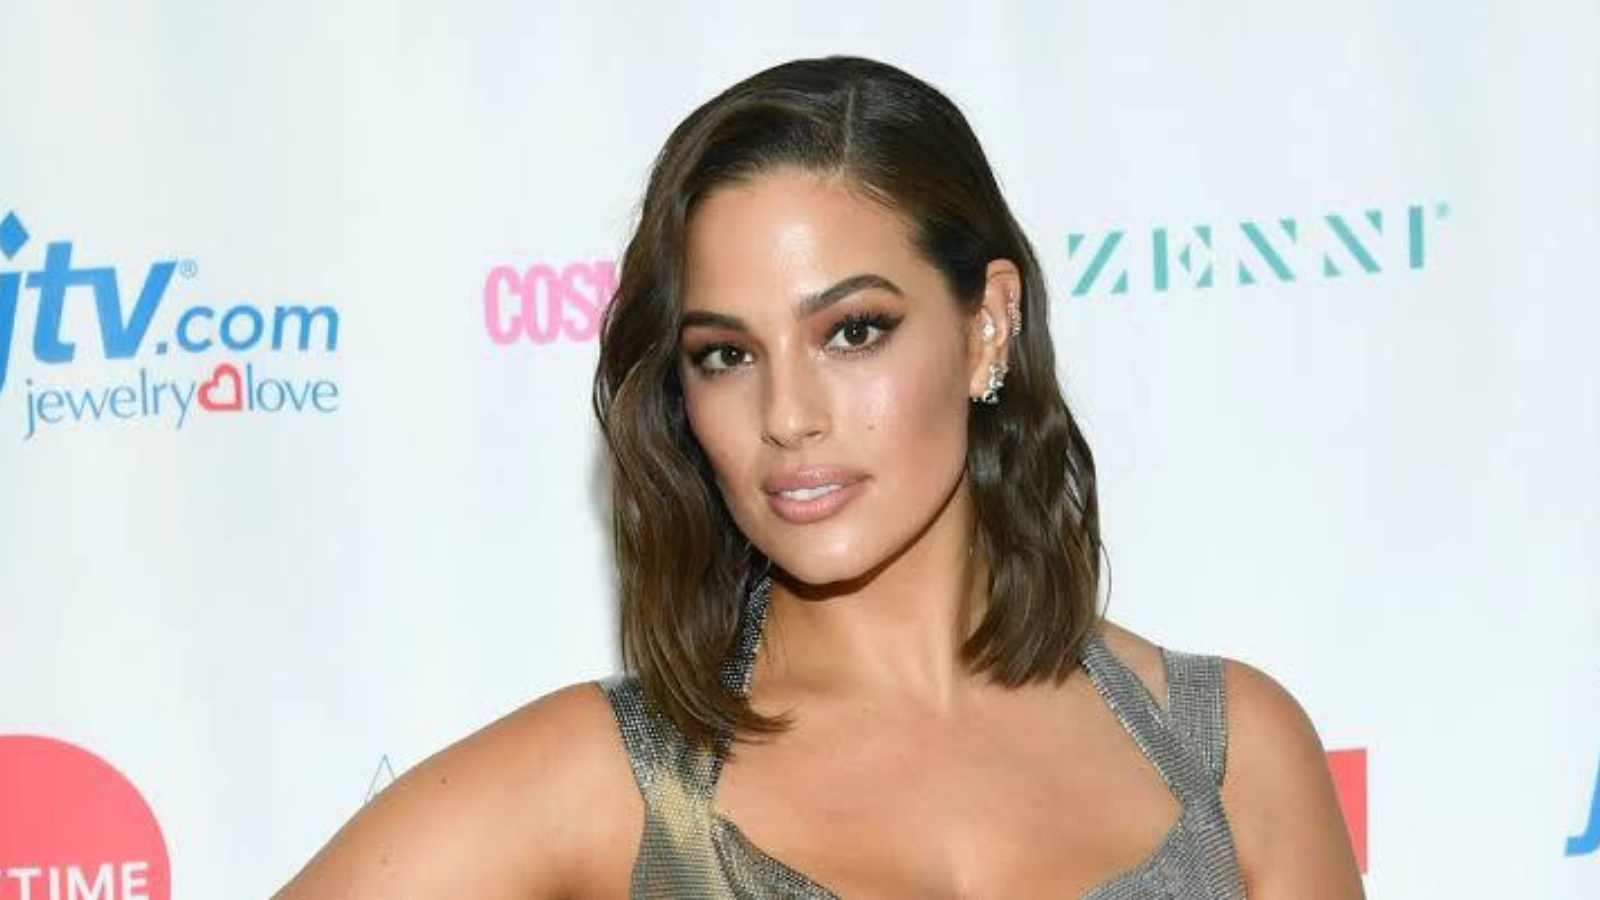 Ashley Graham shares pictures of her stretch marks